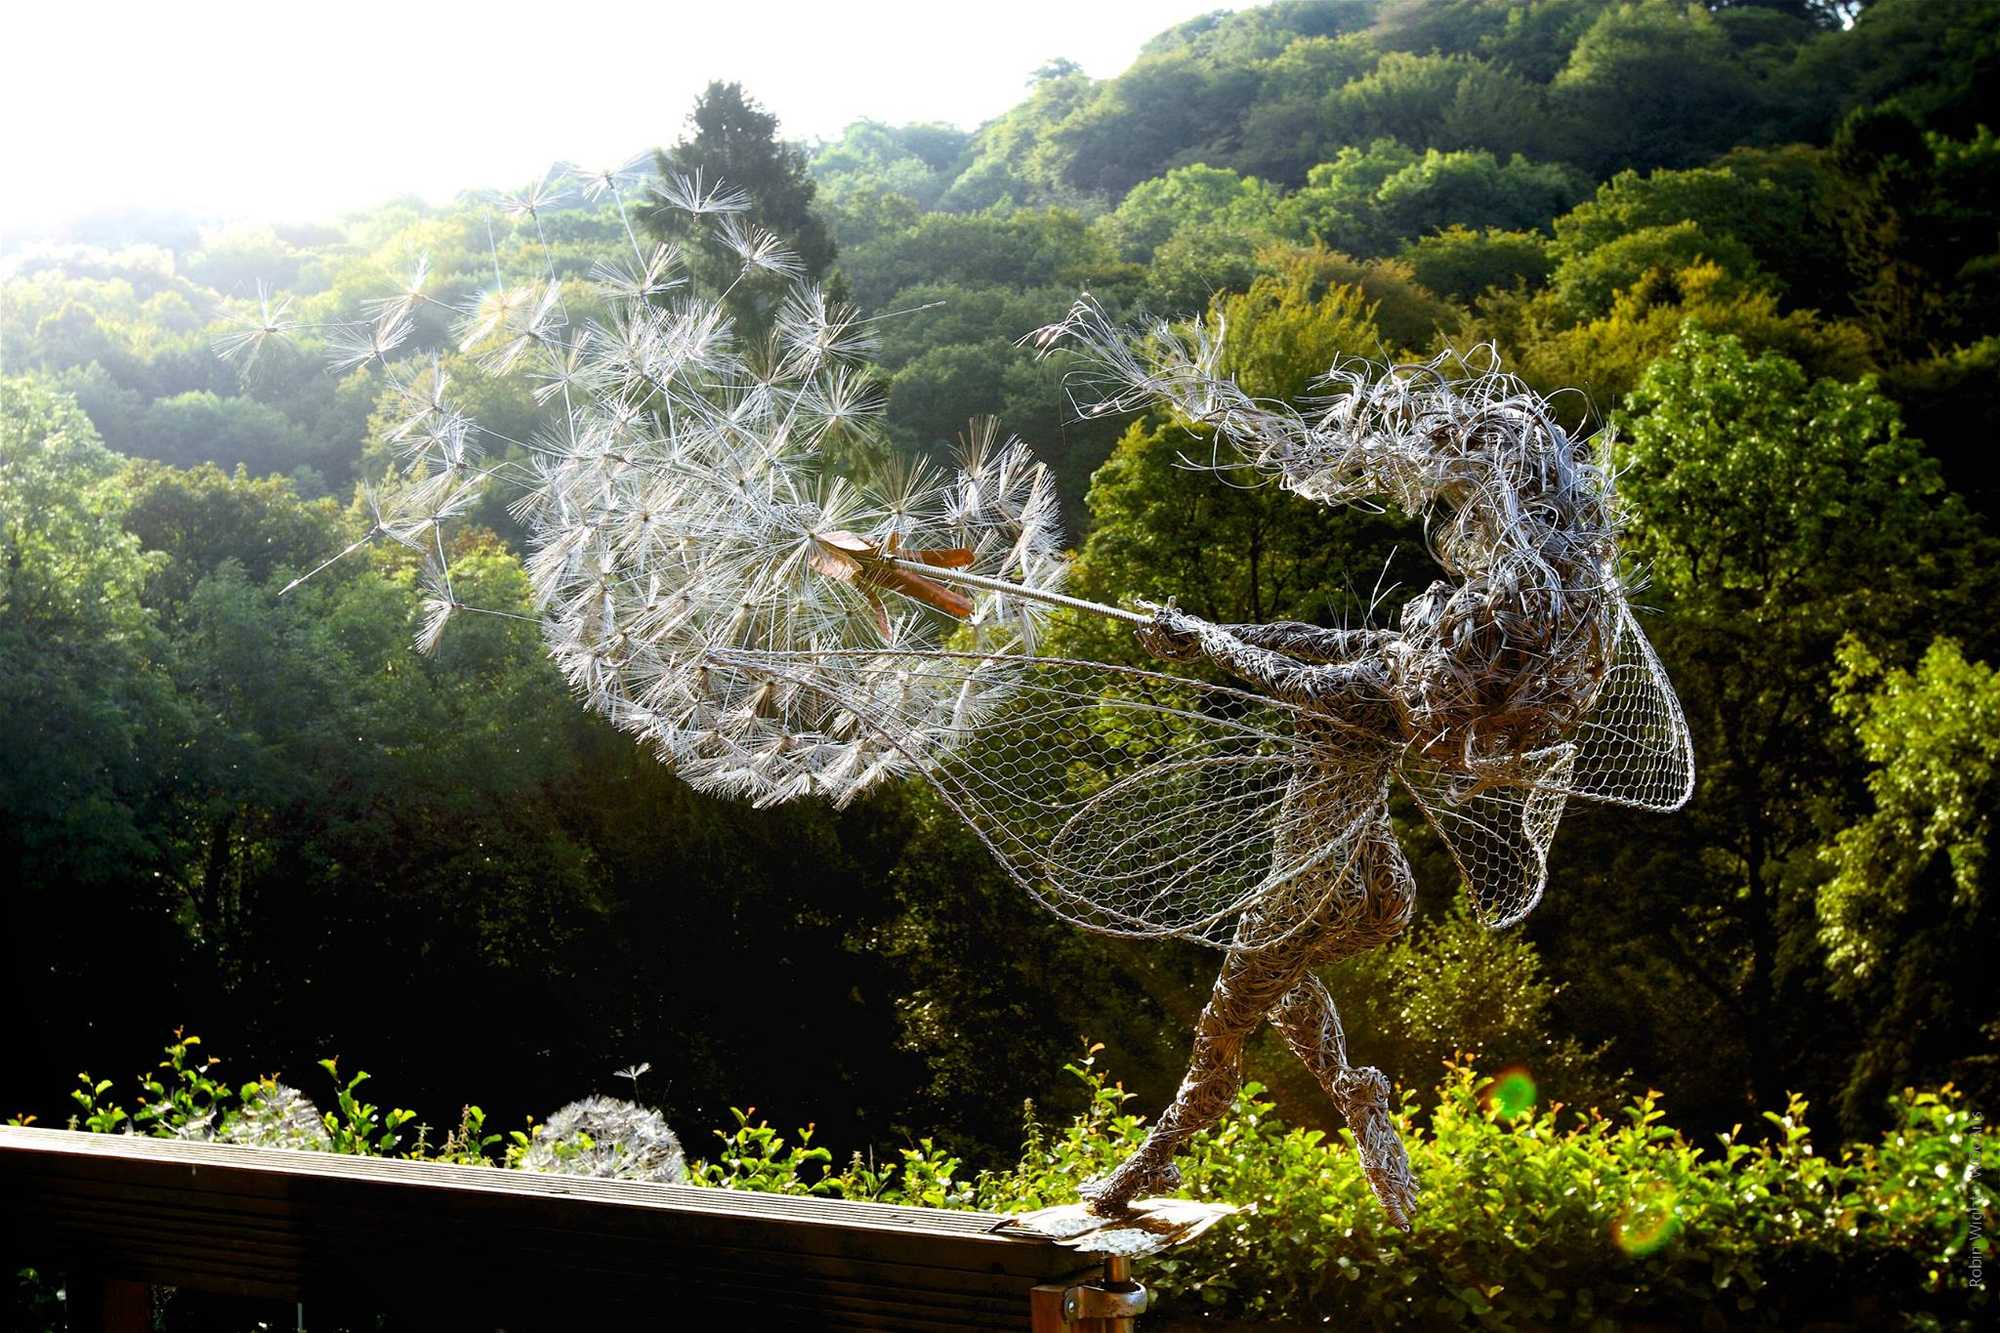 Sculpture by Robin Wight